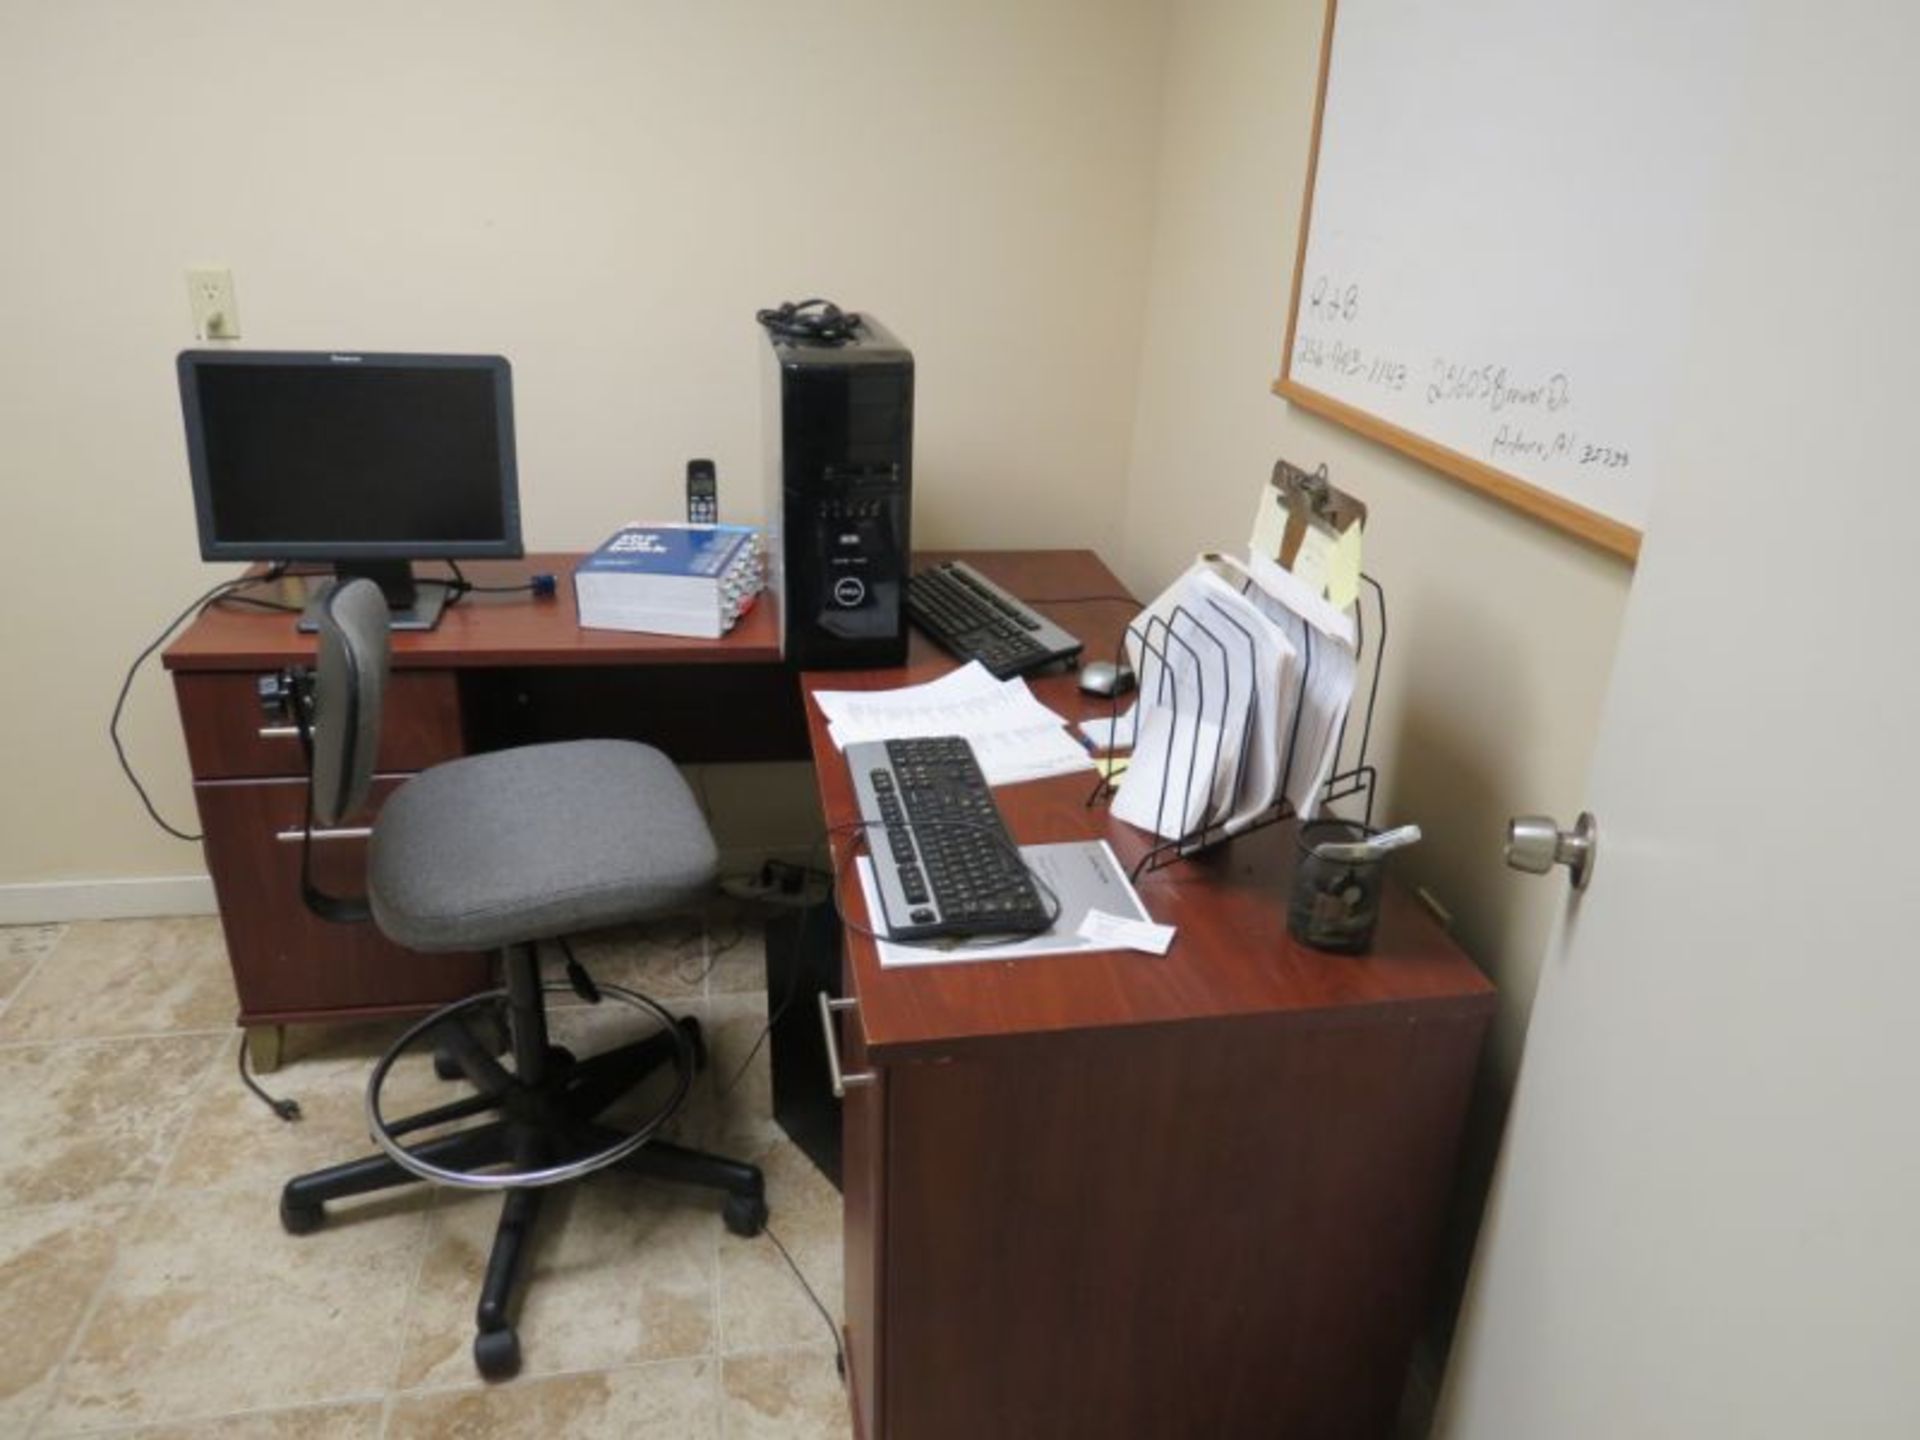 Office Content, Computer, Desk, and Chairs